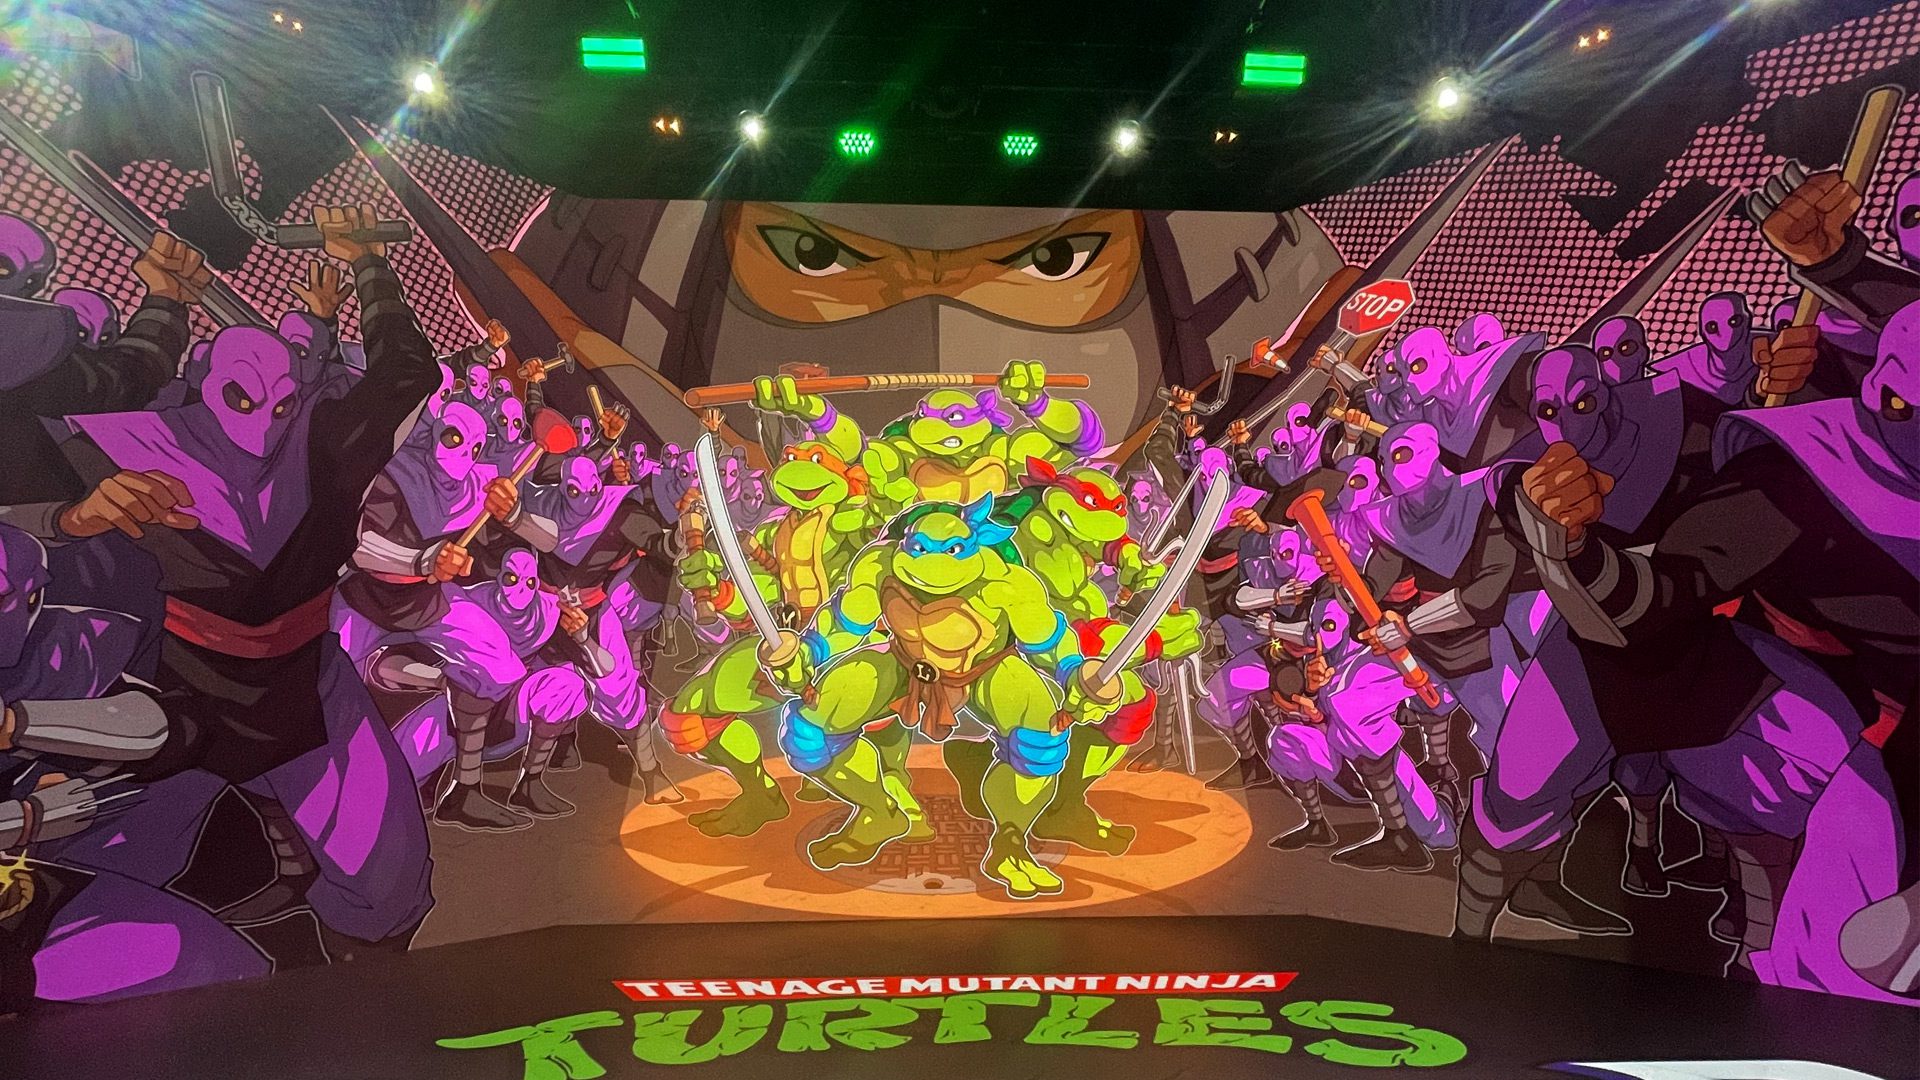 The Gamescom: Opening Night Live stage with TMNT art